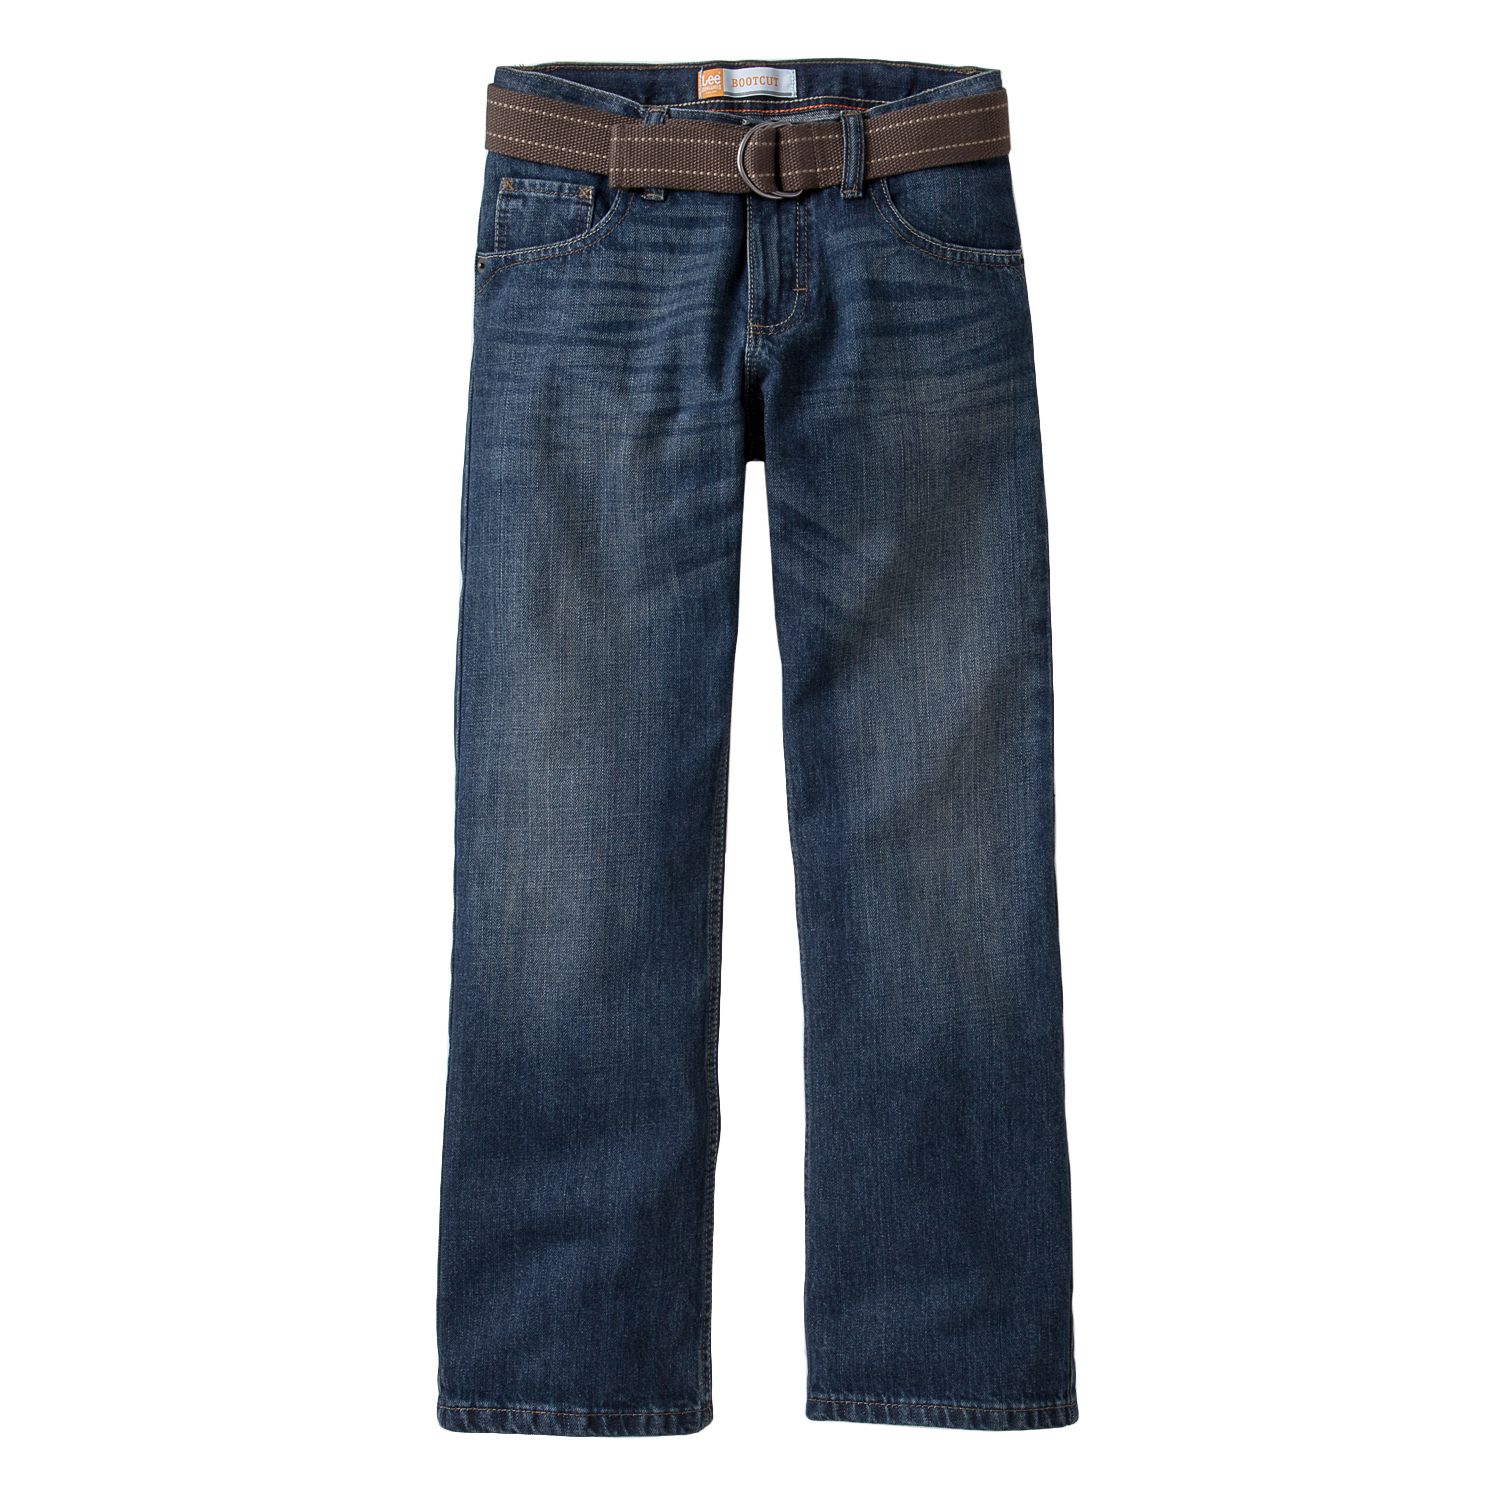 lee dungarees relaxed bootcut jeans